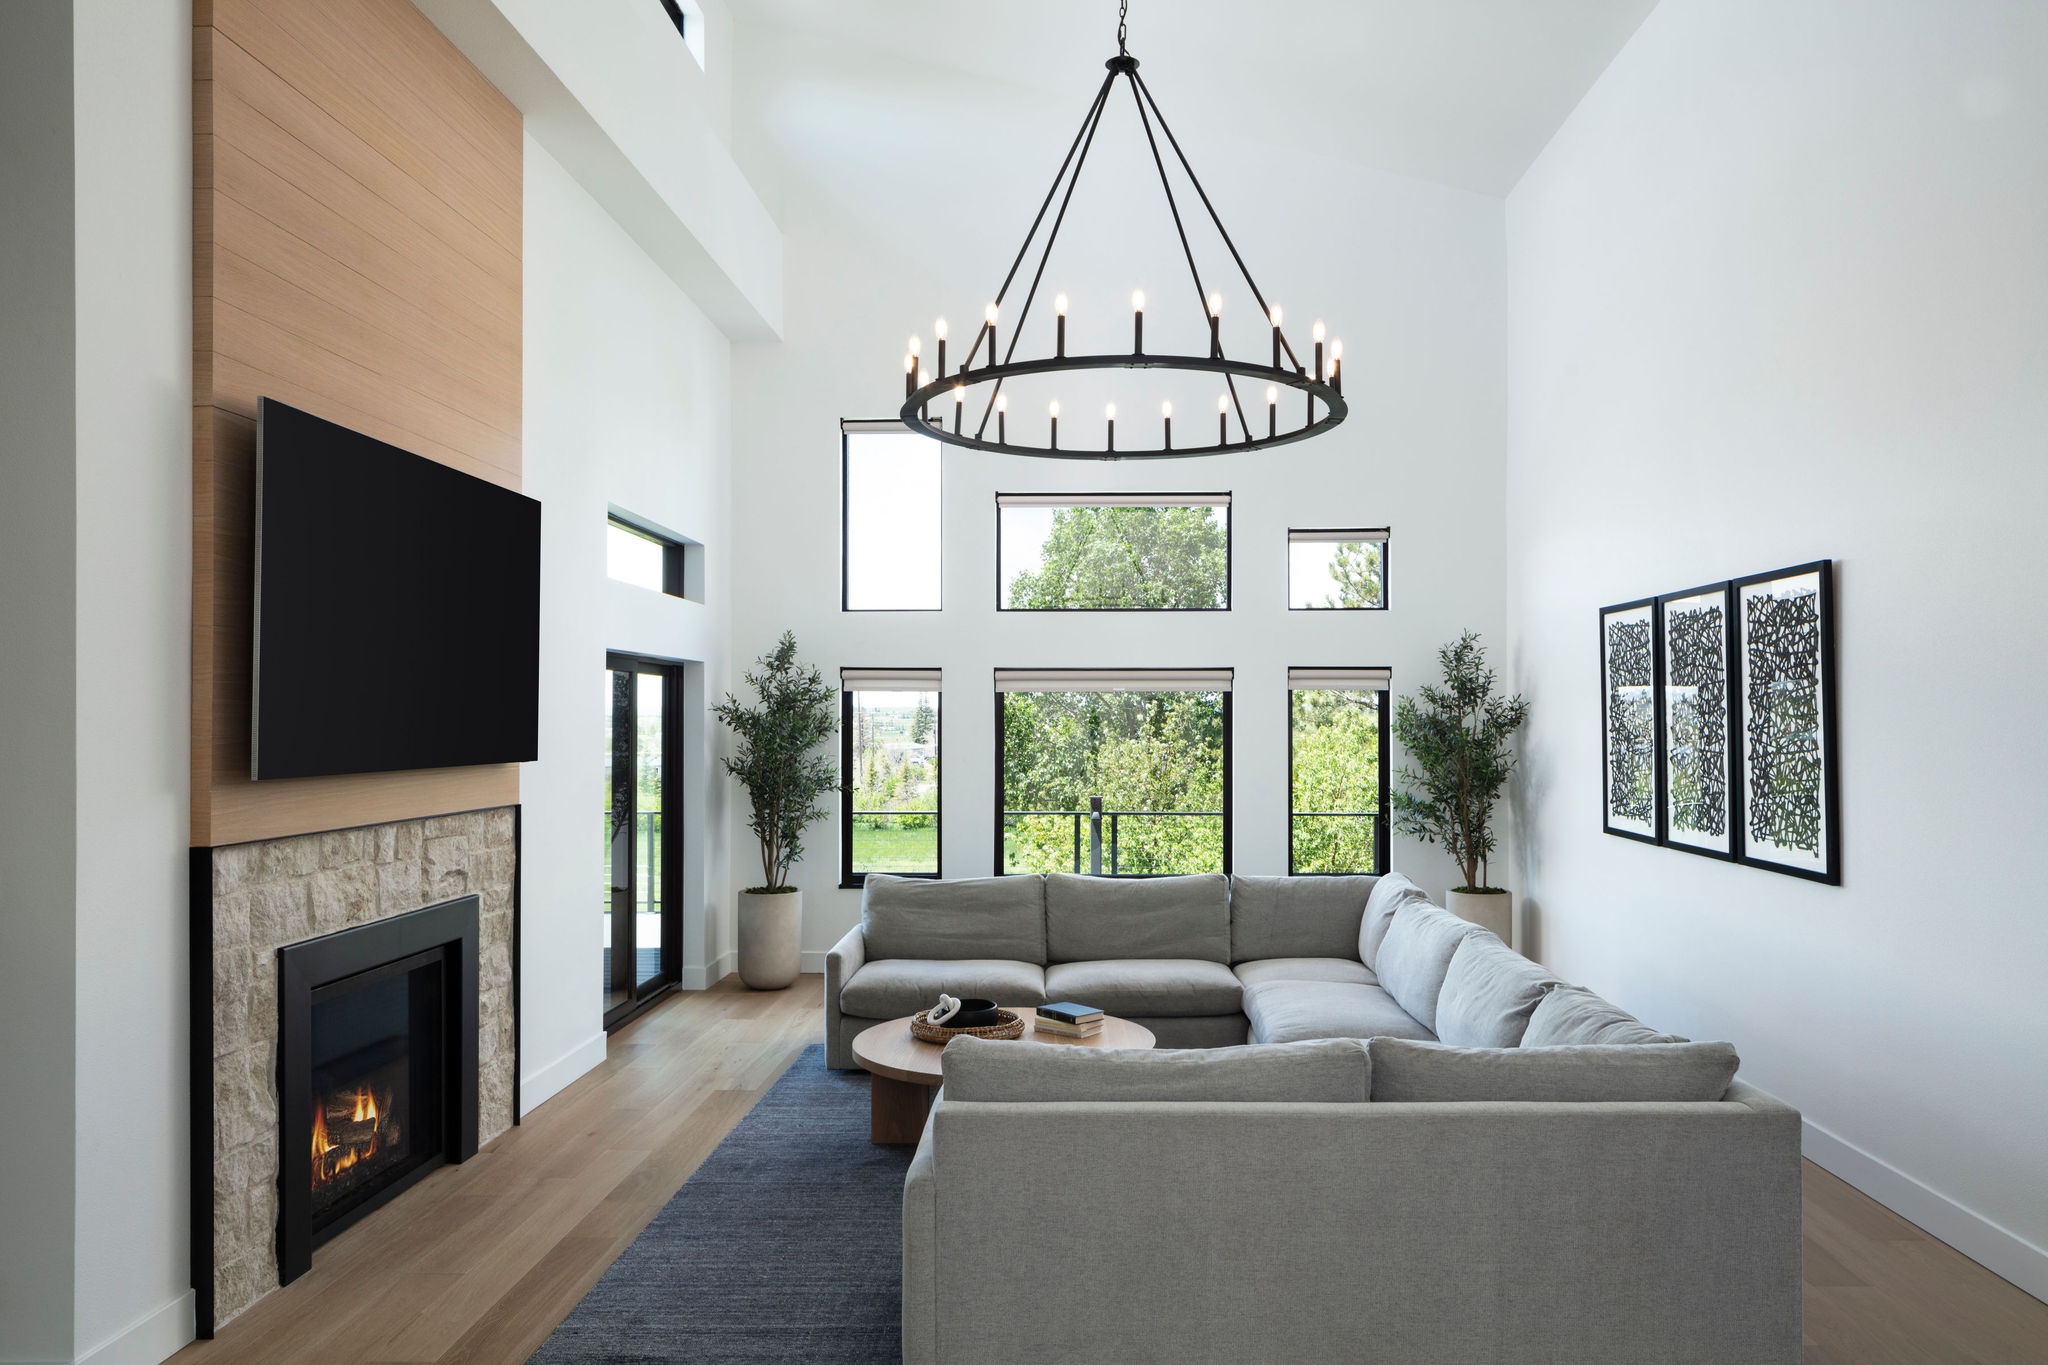 Wildflower custom home - family room with minimalist gas fireplace with natural stone surround, wall-mounted TV, sliding glass doors to the deck outside.